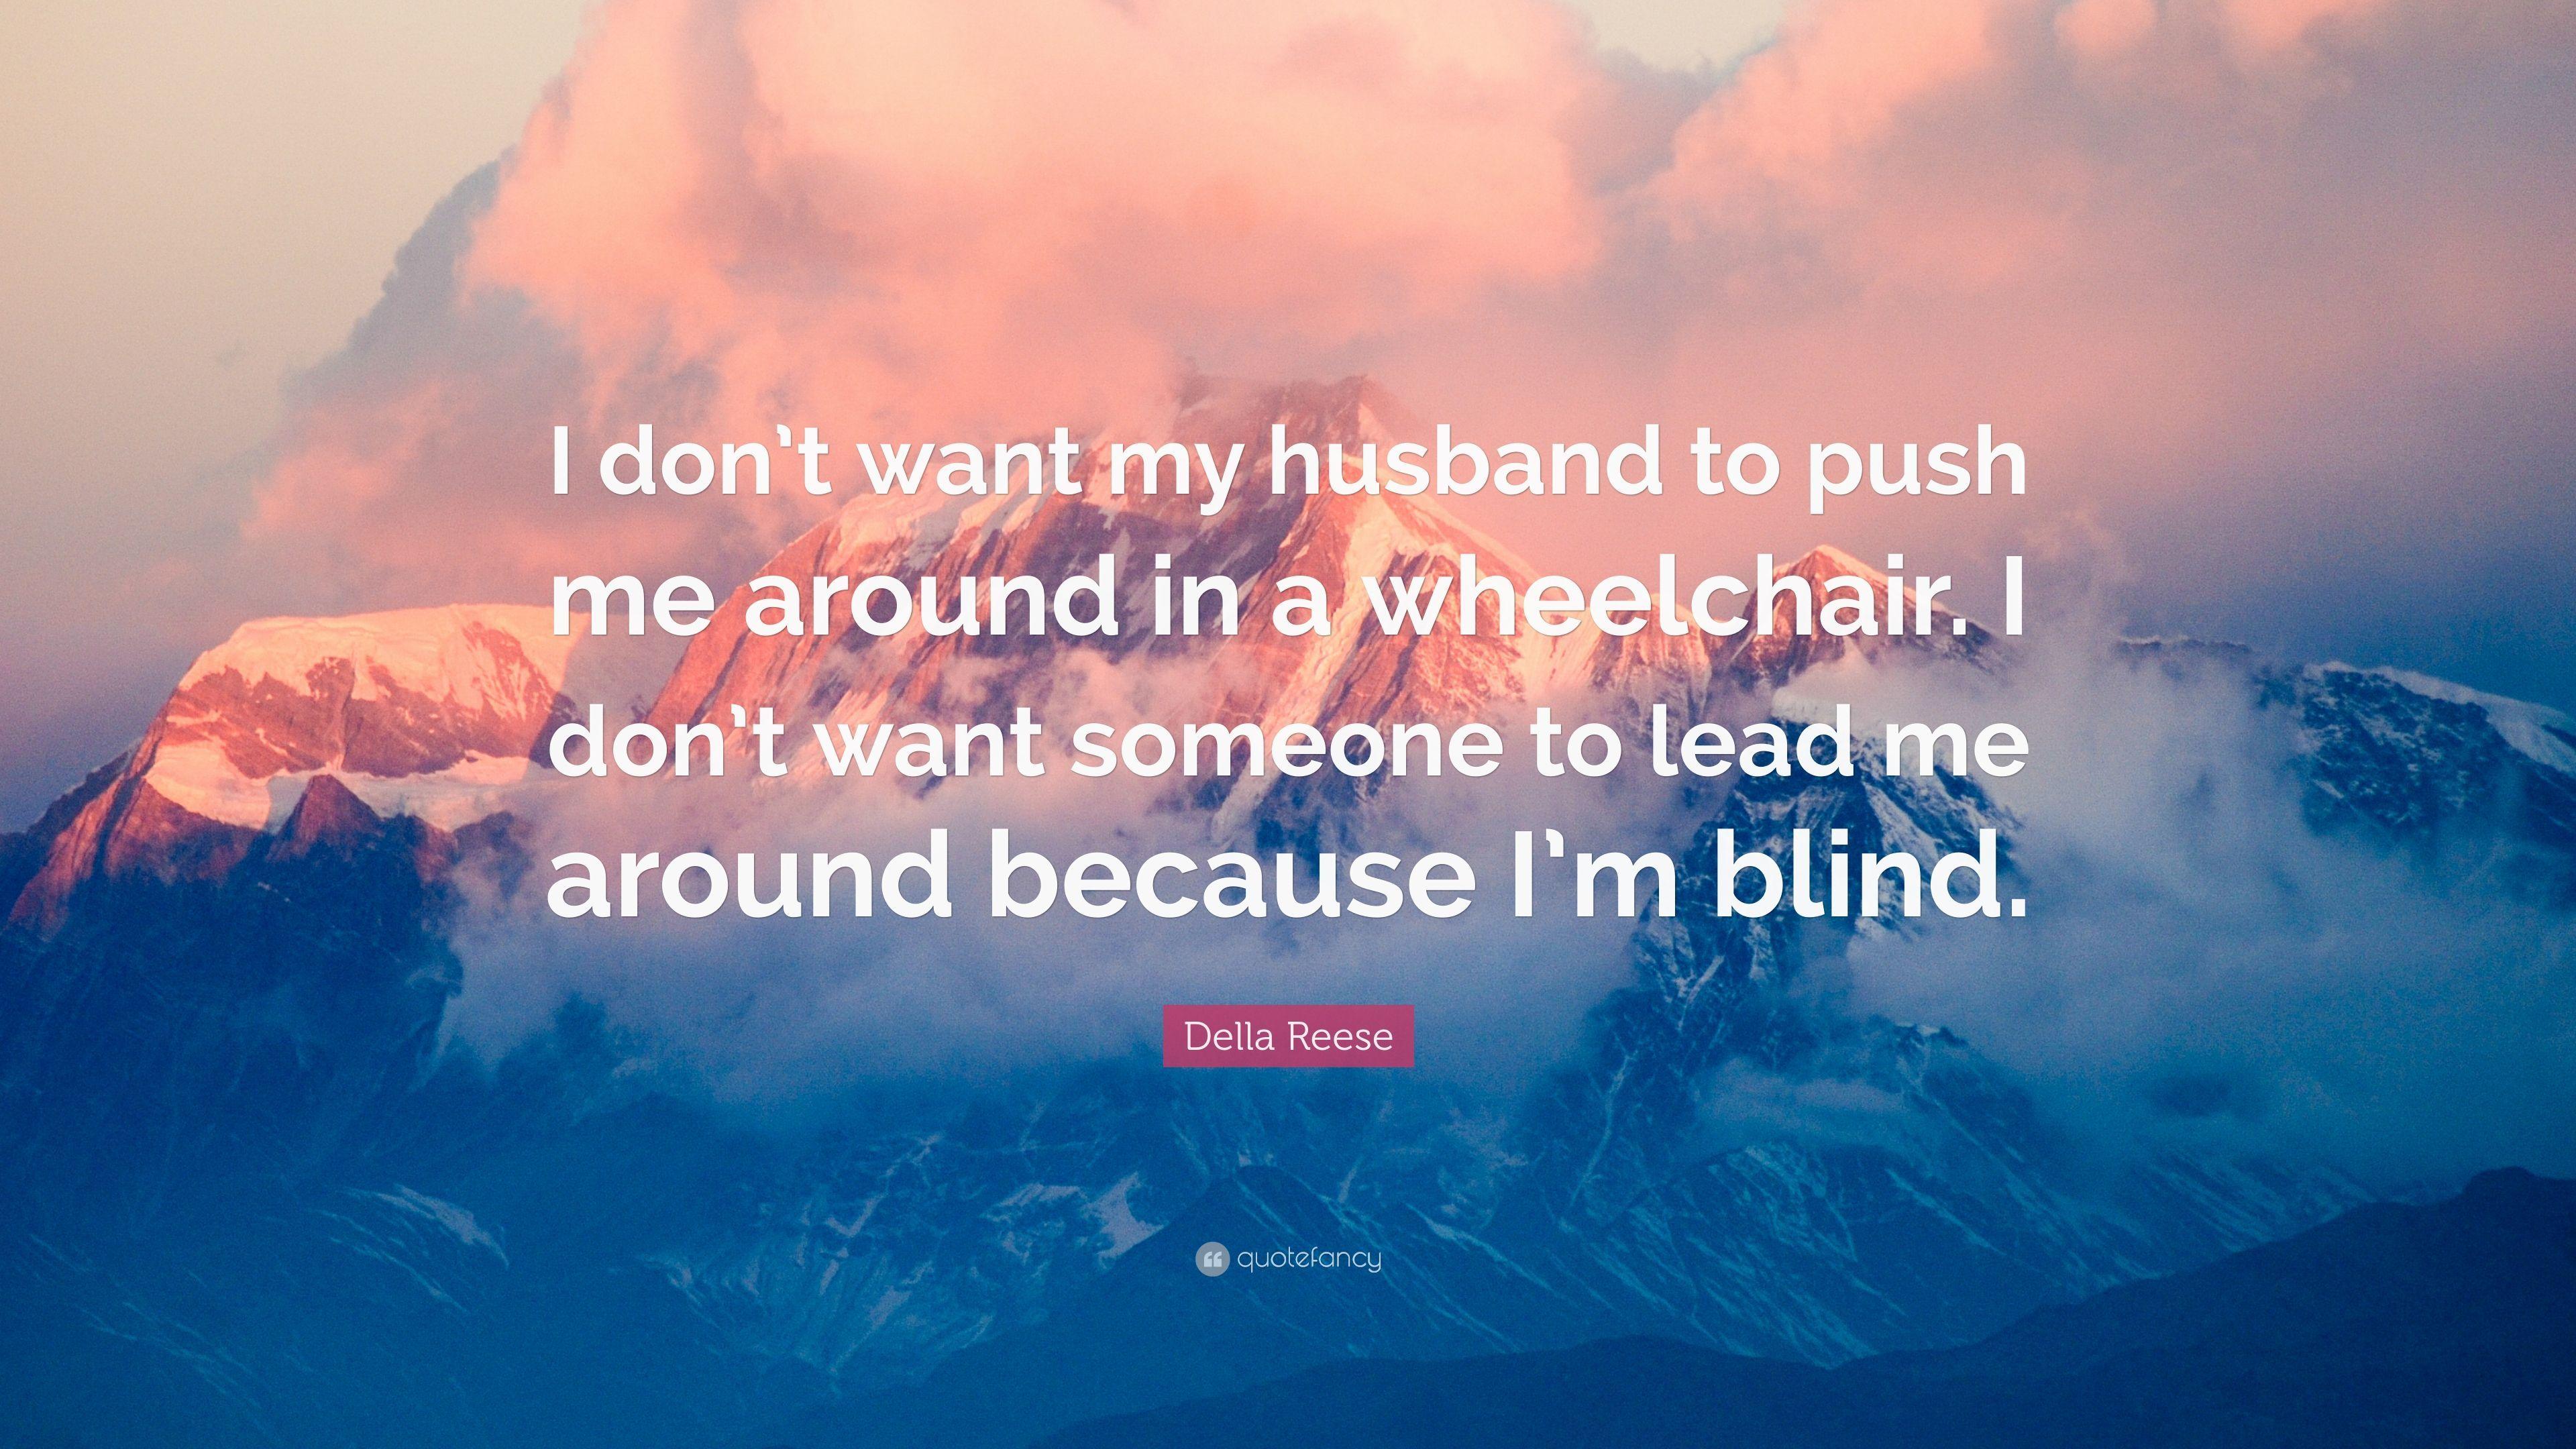 Della Reese Quote: “I don't want my husband to push me around in a